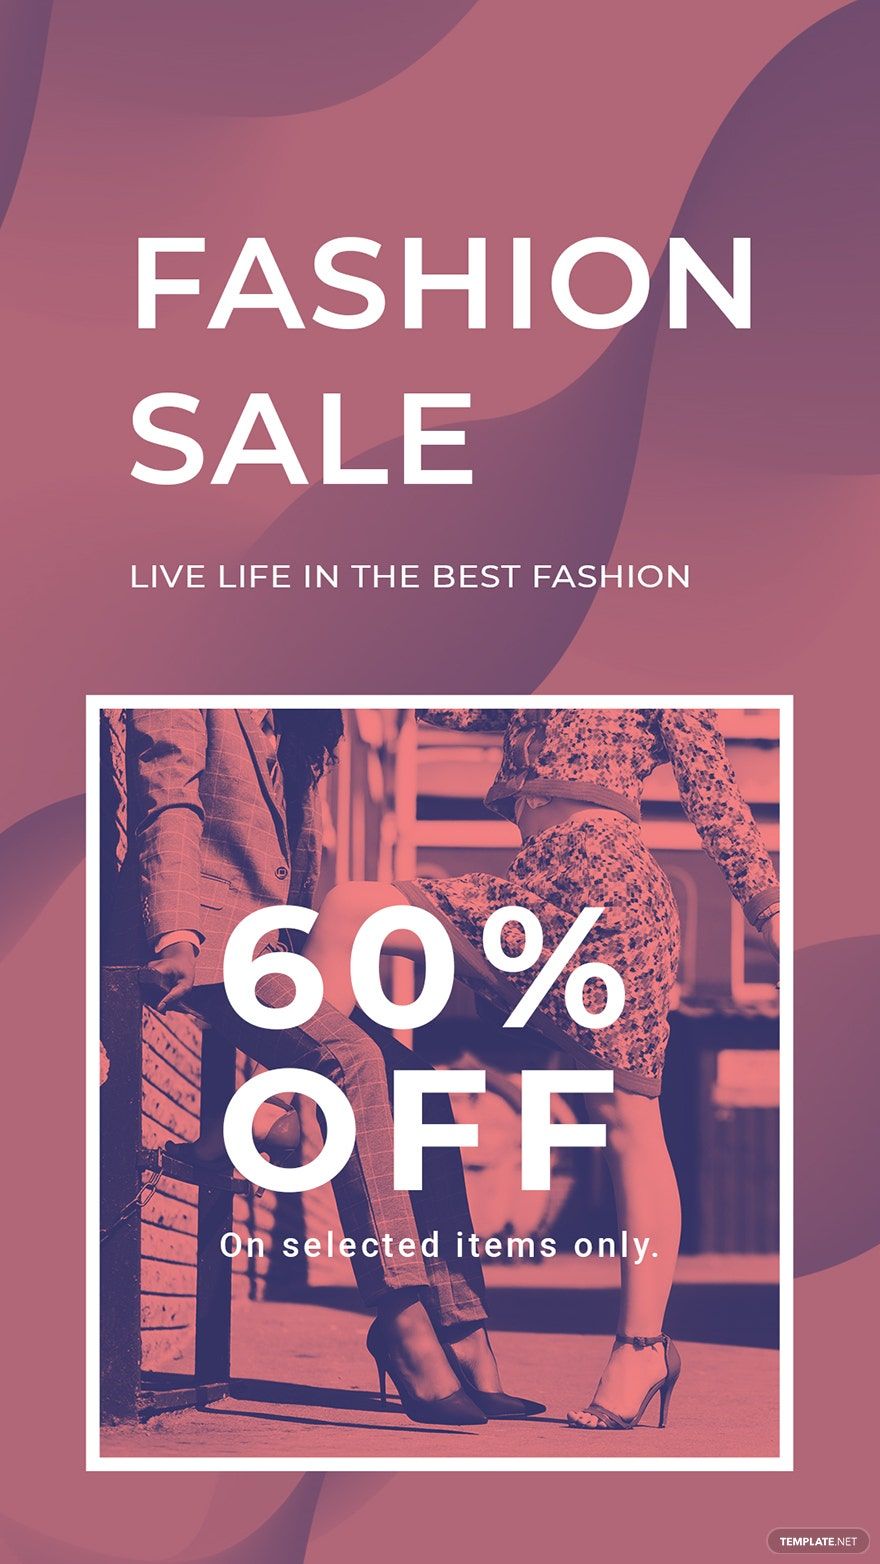 Fashion Sale Offers Instagram Story Template